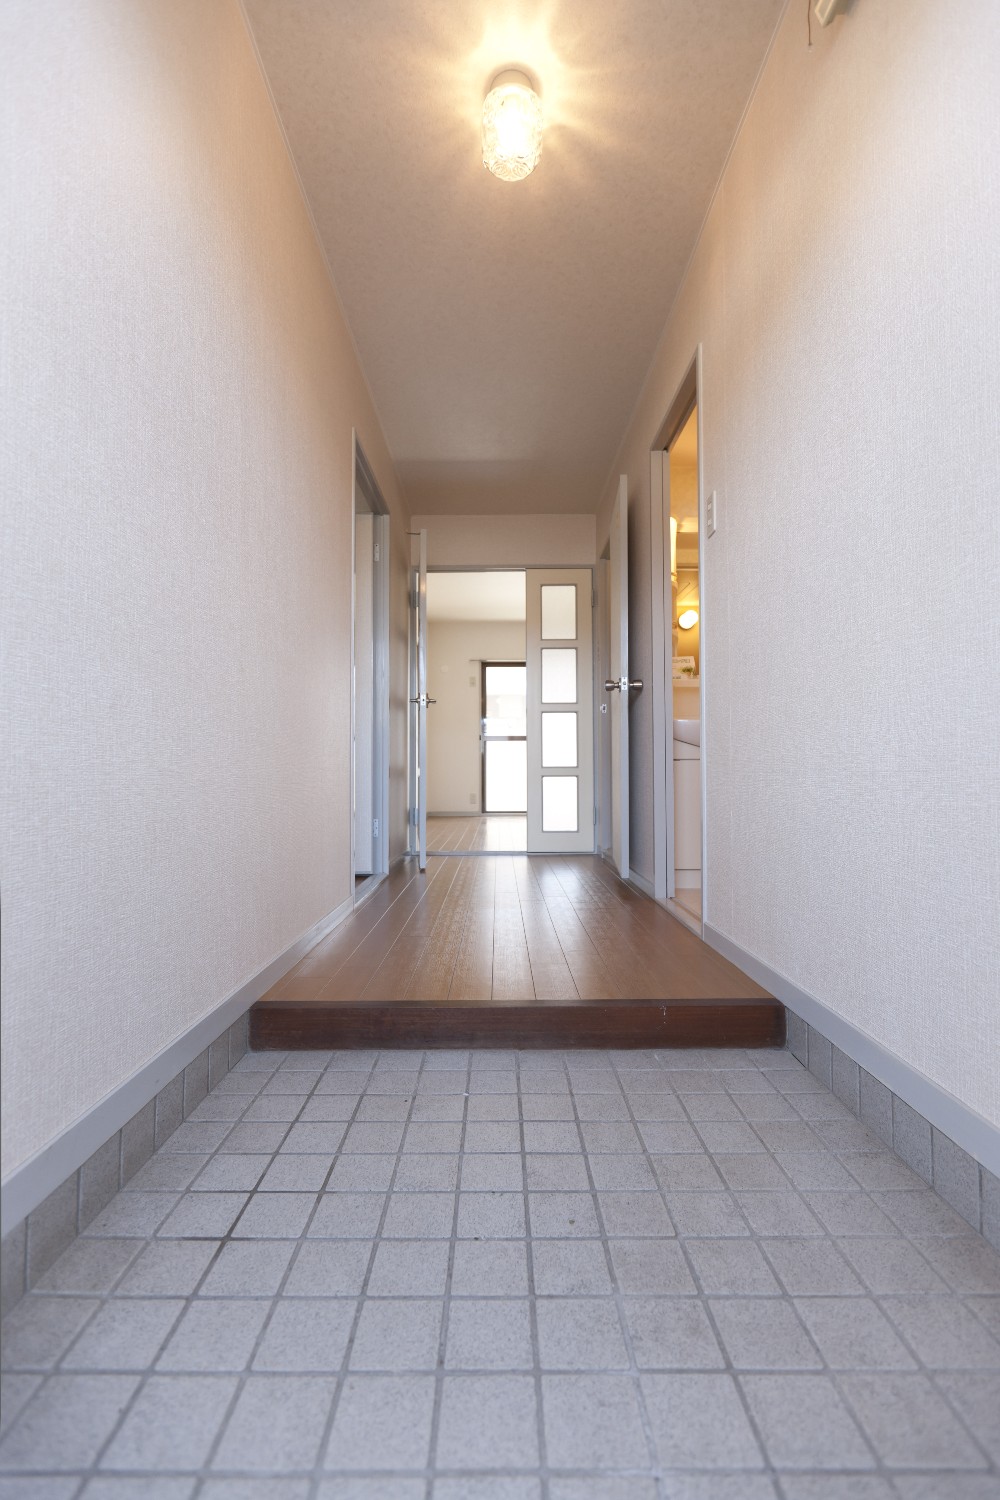 Entrance. Corridor that follows from the entrance with a space to living